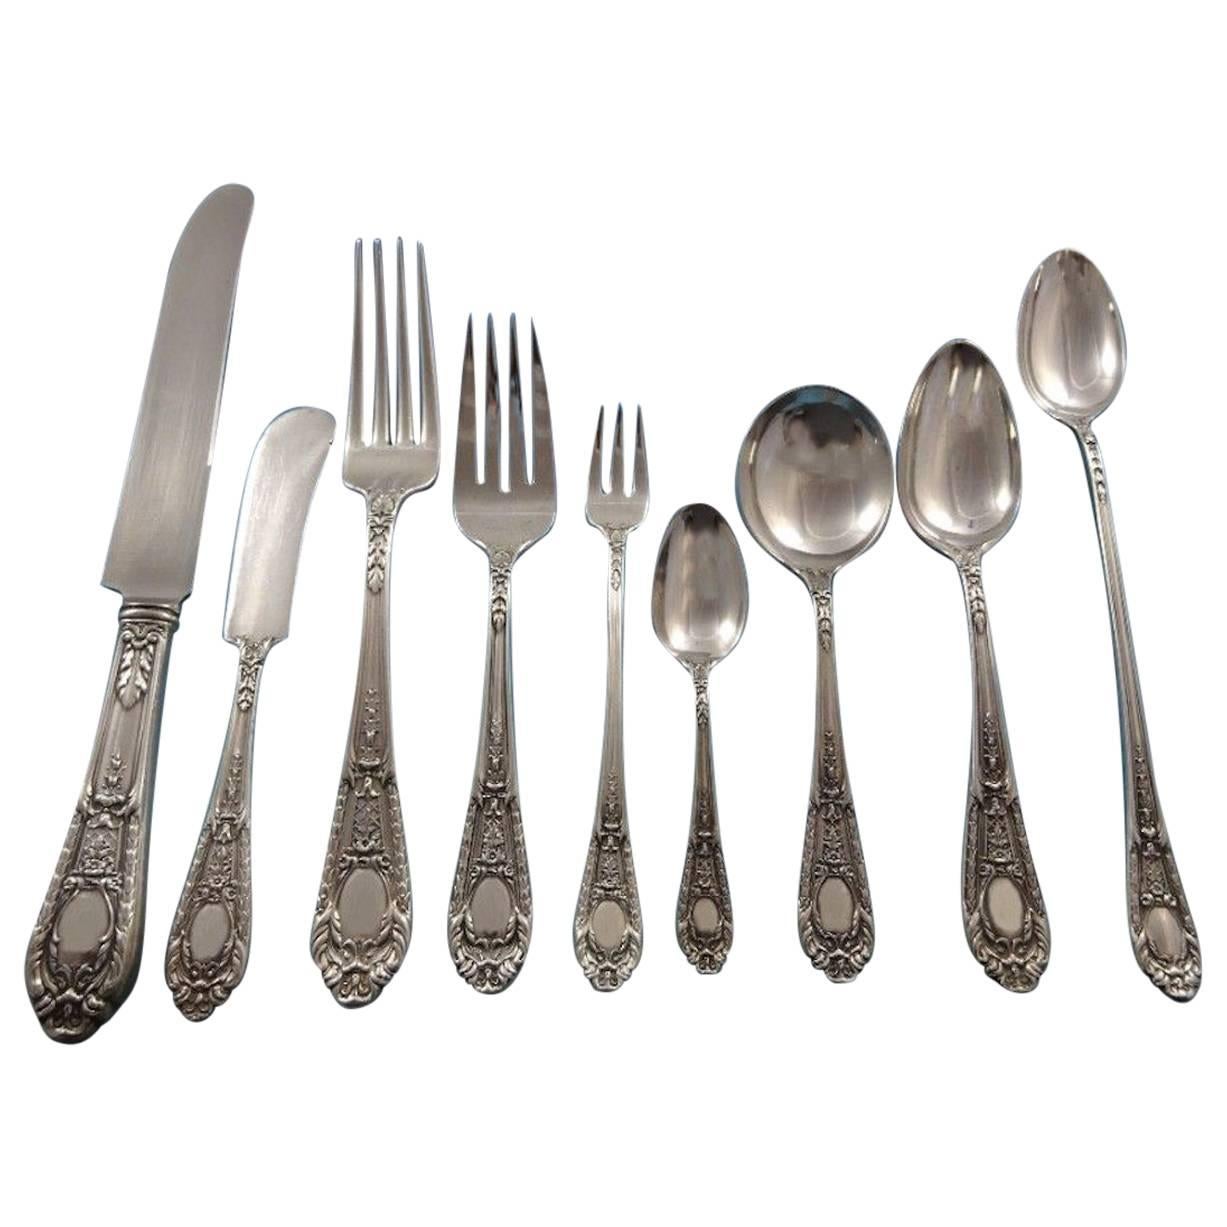 Fontaine by International Sterling Silver Flatware Set for Eight Service 82 Pcs